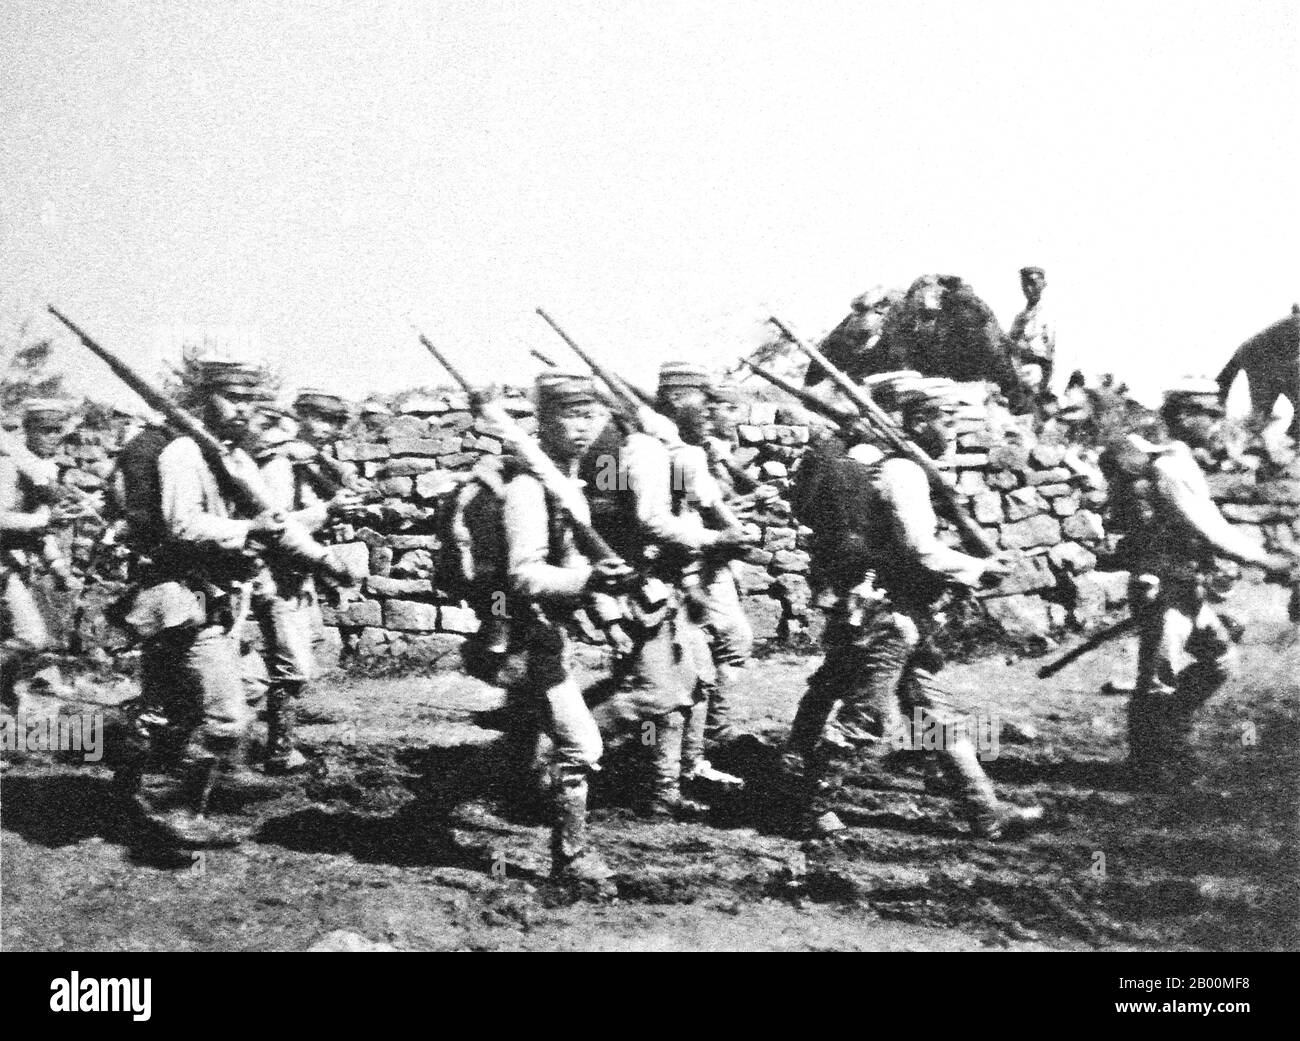 Korea: Japanese soldiers near Chemulpo (Inchon) Korea, Aug- Sept 1904.  The Russo-Japanese War (8 February 1904 – 5 September 1905) was the first great war of the 20th century which grew out of the rival imperial ambitions of the Russian Empire and Japanese Empire over Manchuria and Korea. The resulting campaigns, in which the Japanese military attained victory over the Russian forces arrayed against them, were unexpected. Stock Photo